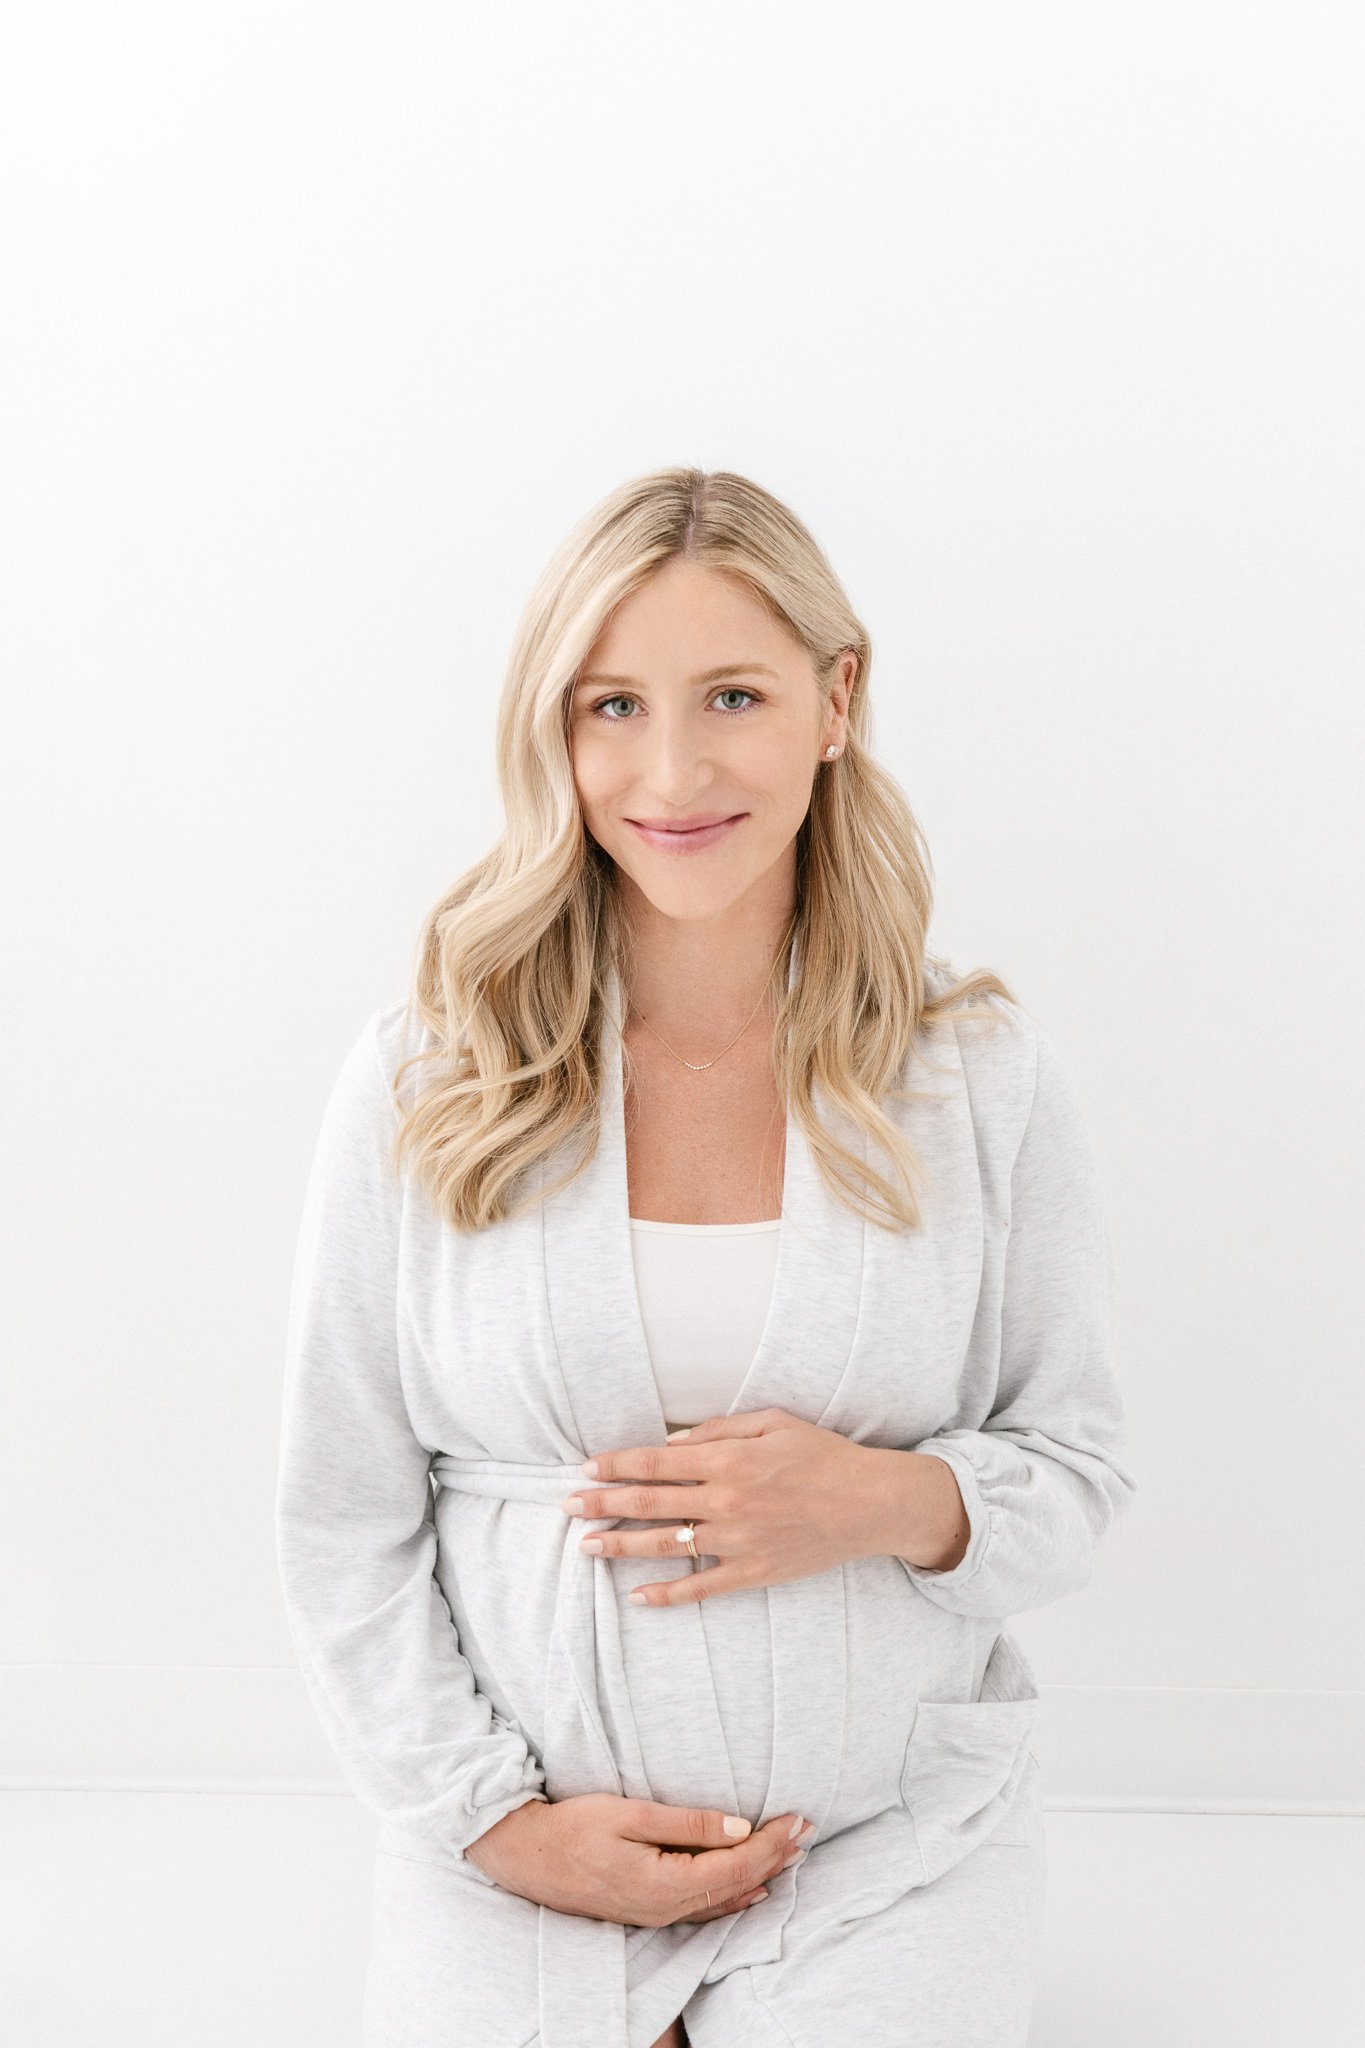  A blonde woman holds her pregnant baby bump as she smiles by Nicole Hawkins Photography in NJ. white maternity dress #NicoleHawkinsPhotography #NicoleHawkinsMaternity #Studiomaternityportraits #NewJerseymaternity #NewYorkMaternity 